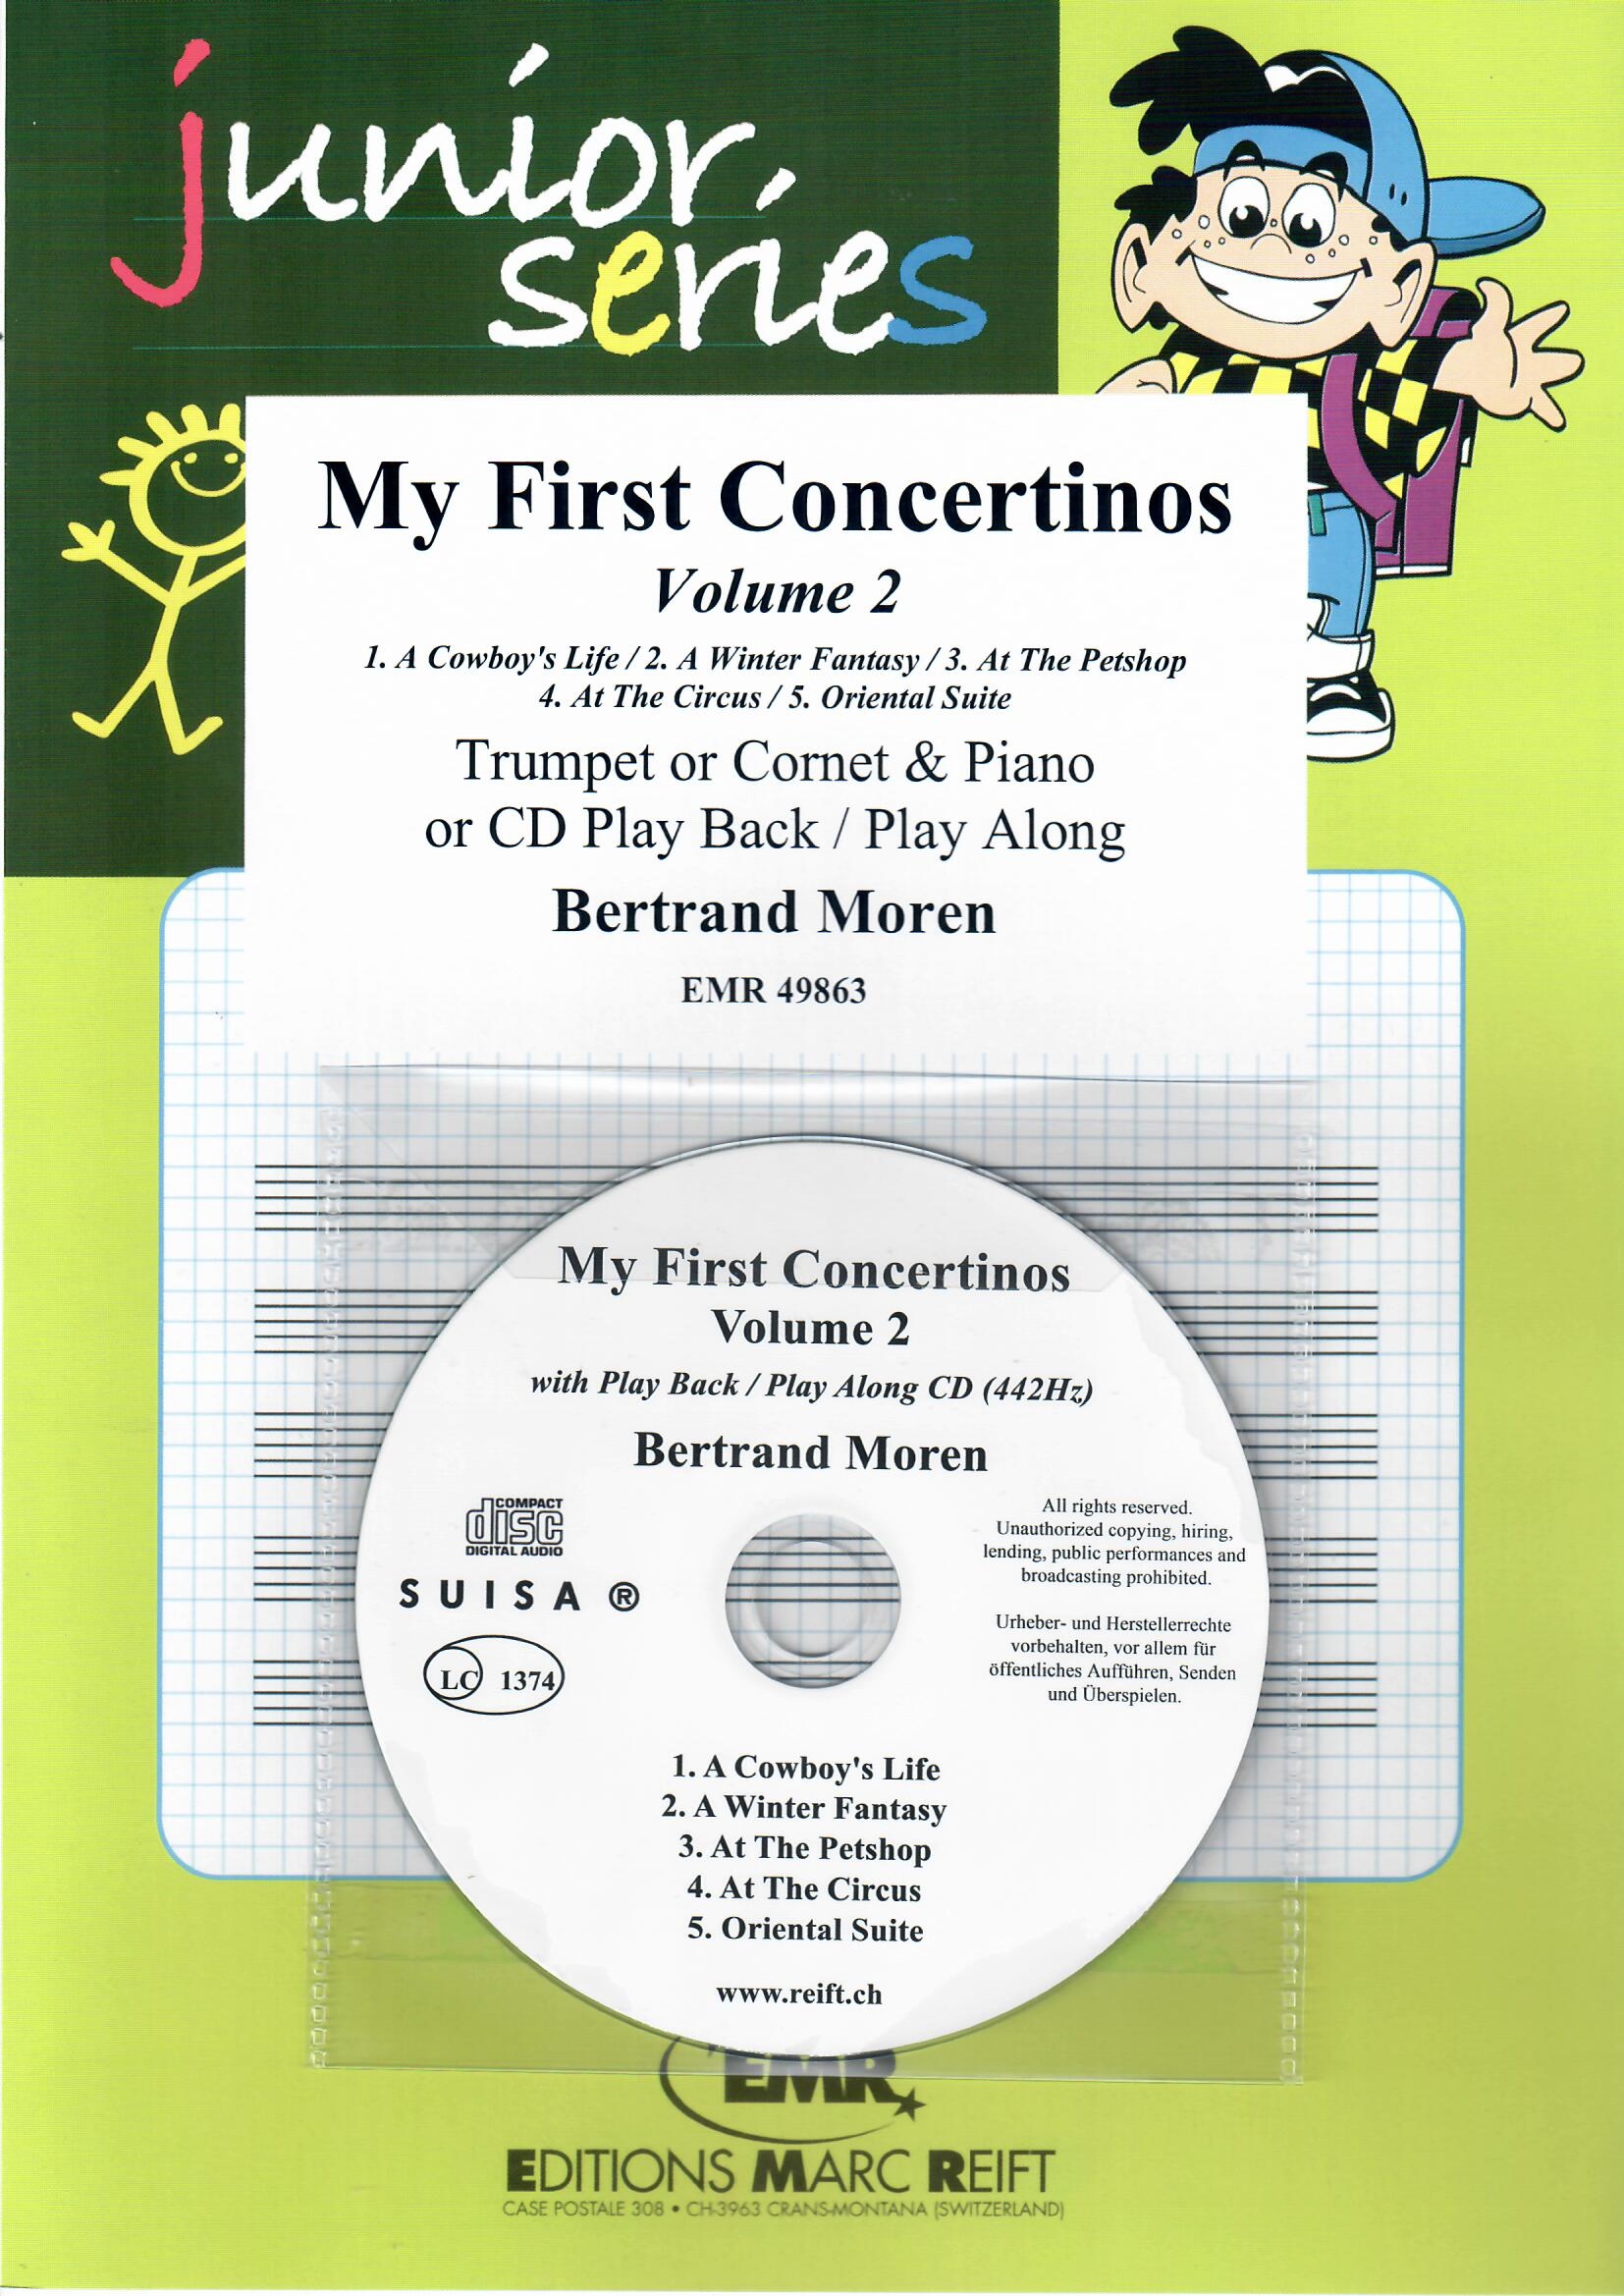 MY FIRST CONCERTINOS VOLUME 2 - Trumpet & Piano